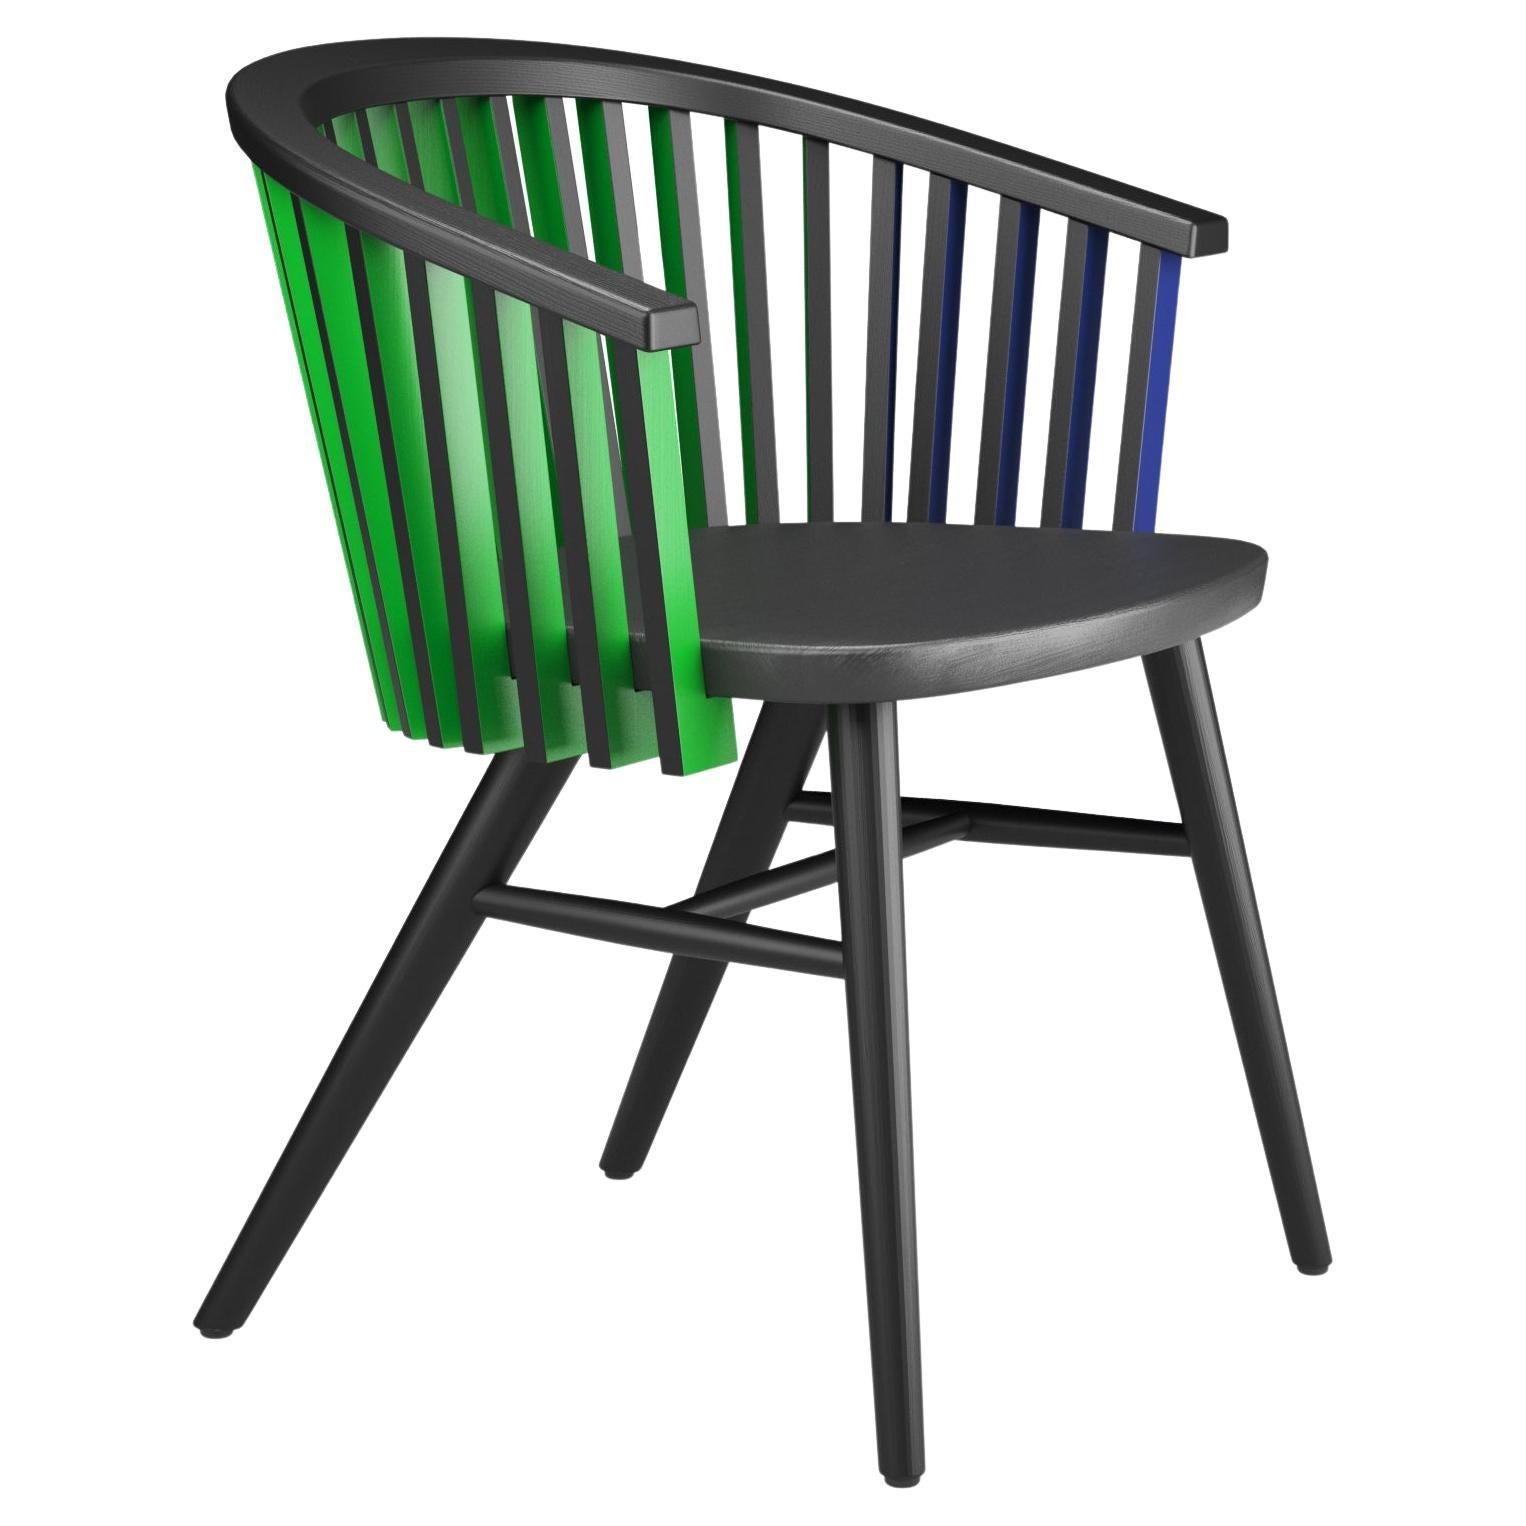 Hayche, Tornasol Rounded chair, Bla, Green & Blue, Solid Wood, UK, Made To Order For Sale